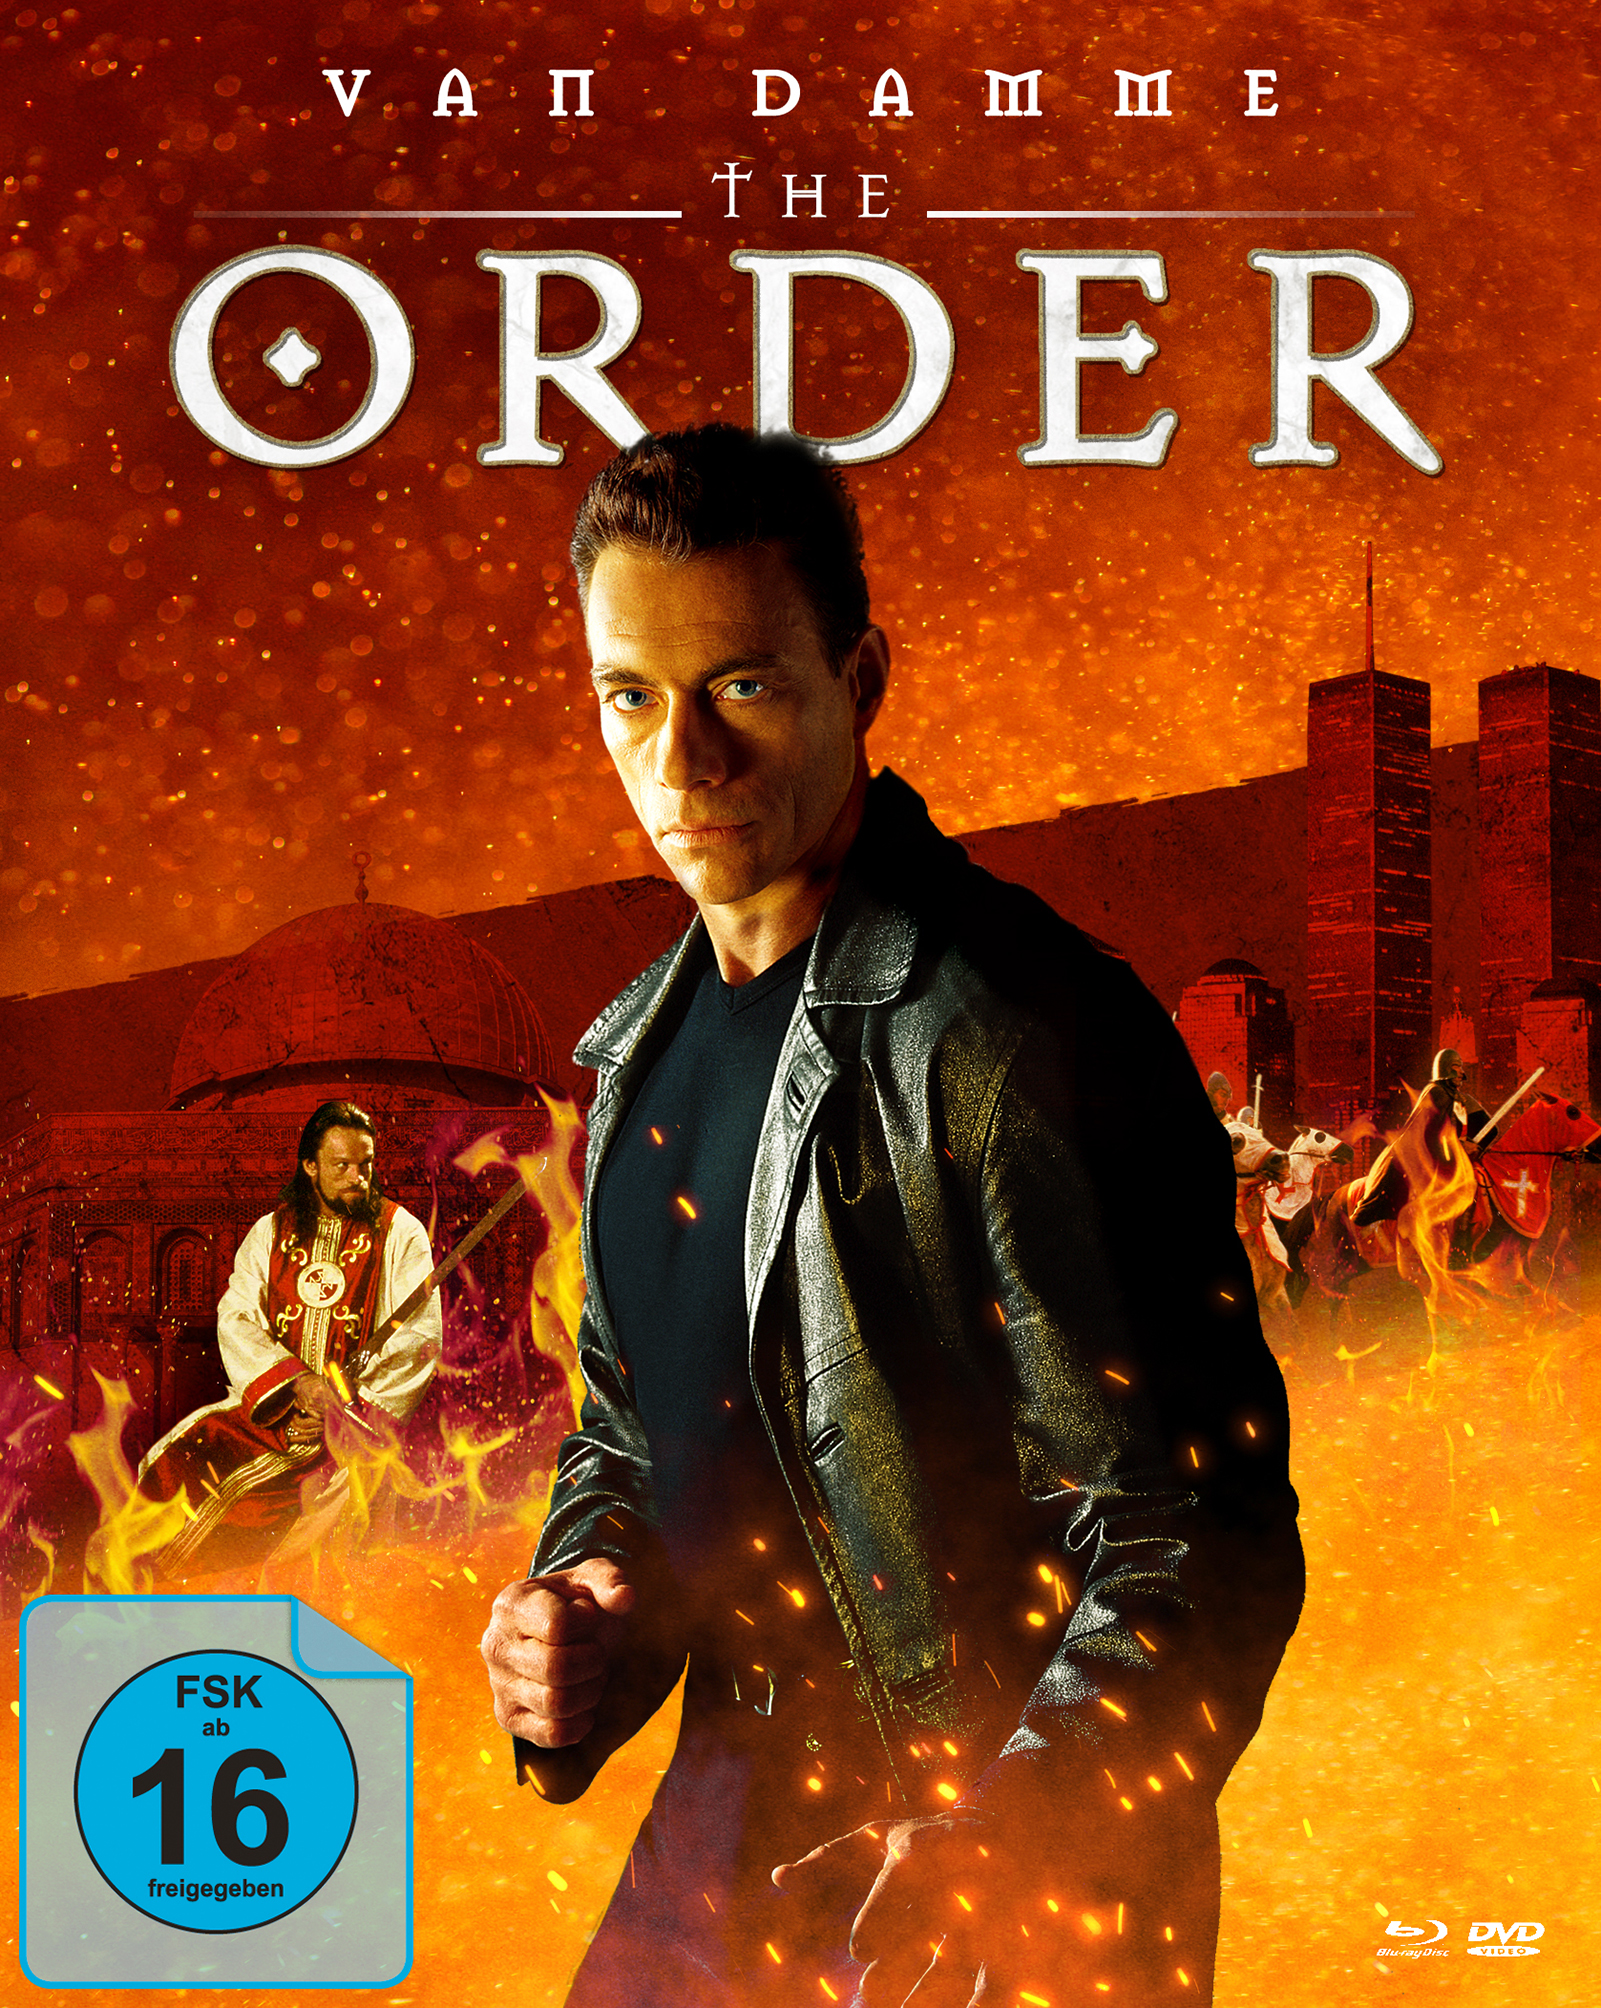 The Order (Mediabook A, Blu-ray+DVD) Cover